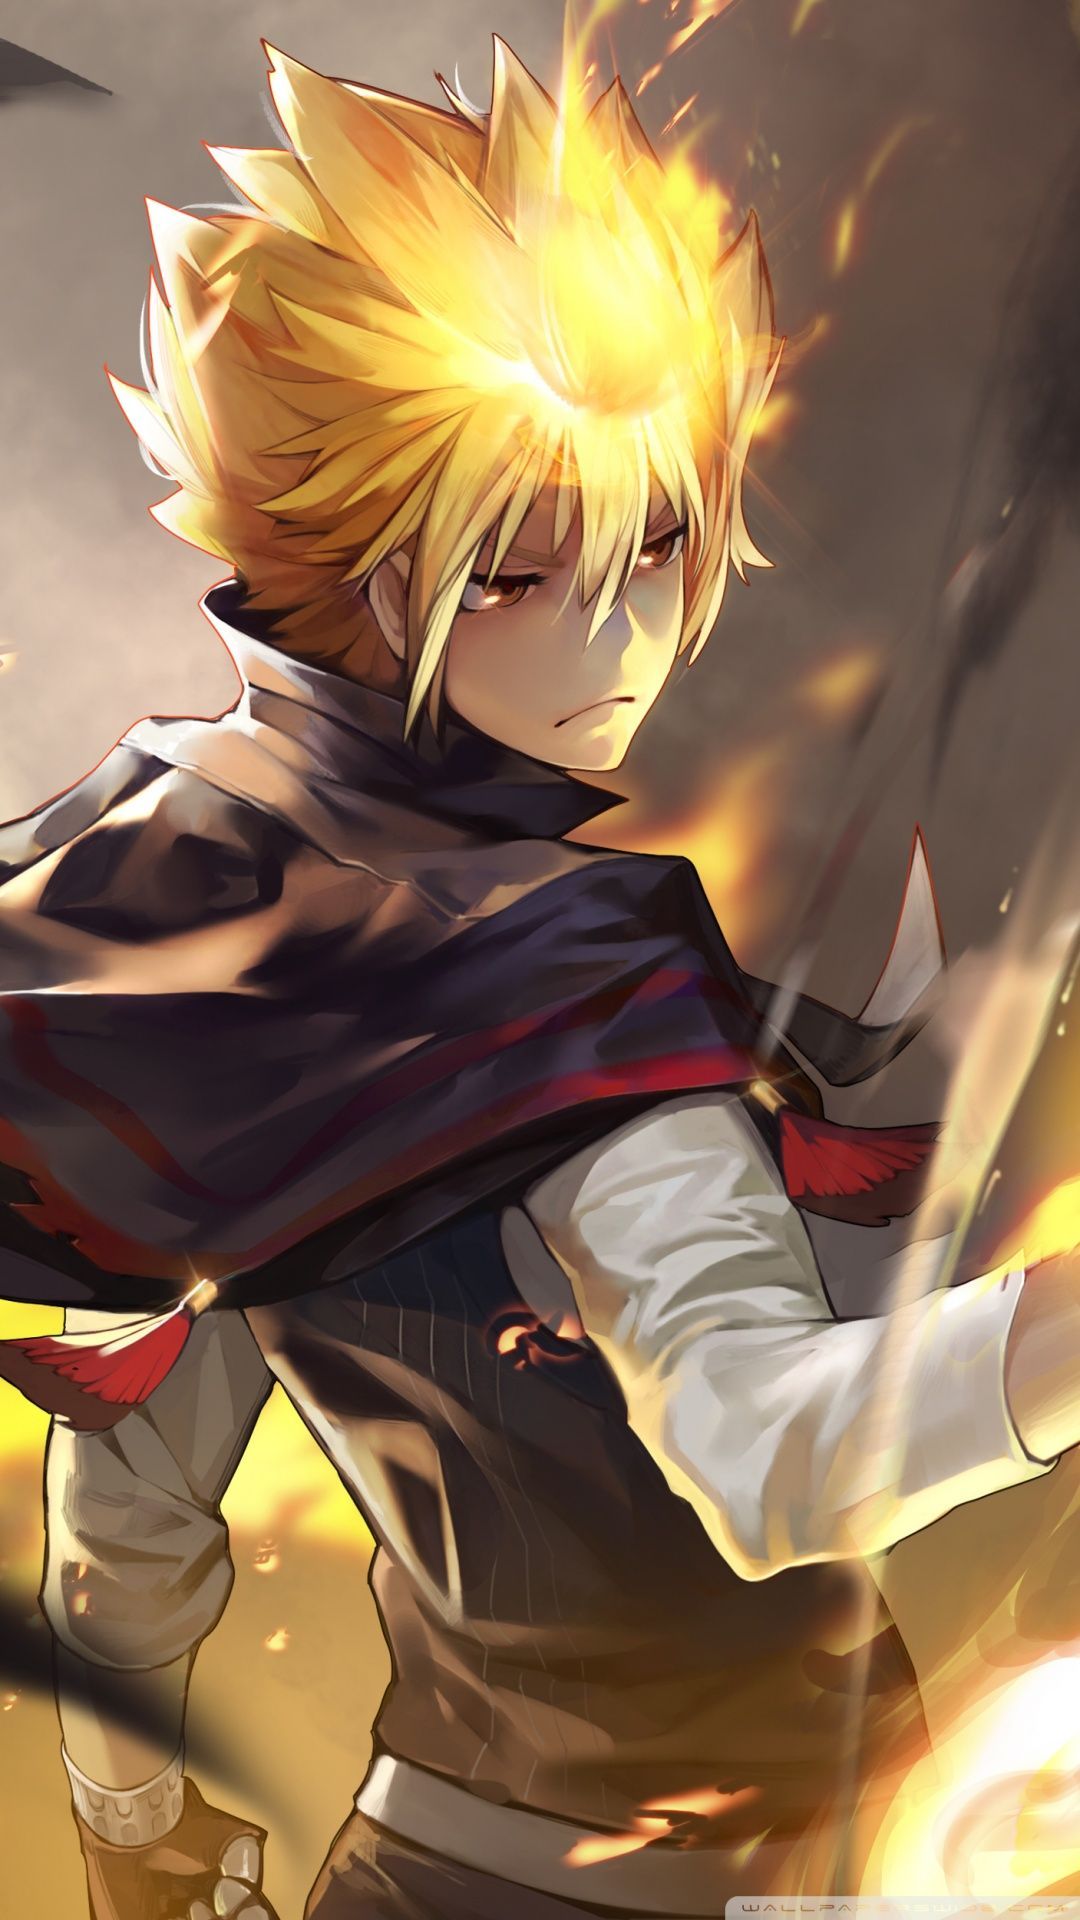 Anime Wallpaper 1080p Hupages Download iPhone Wallpaper